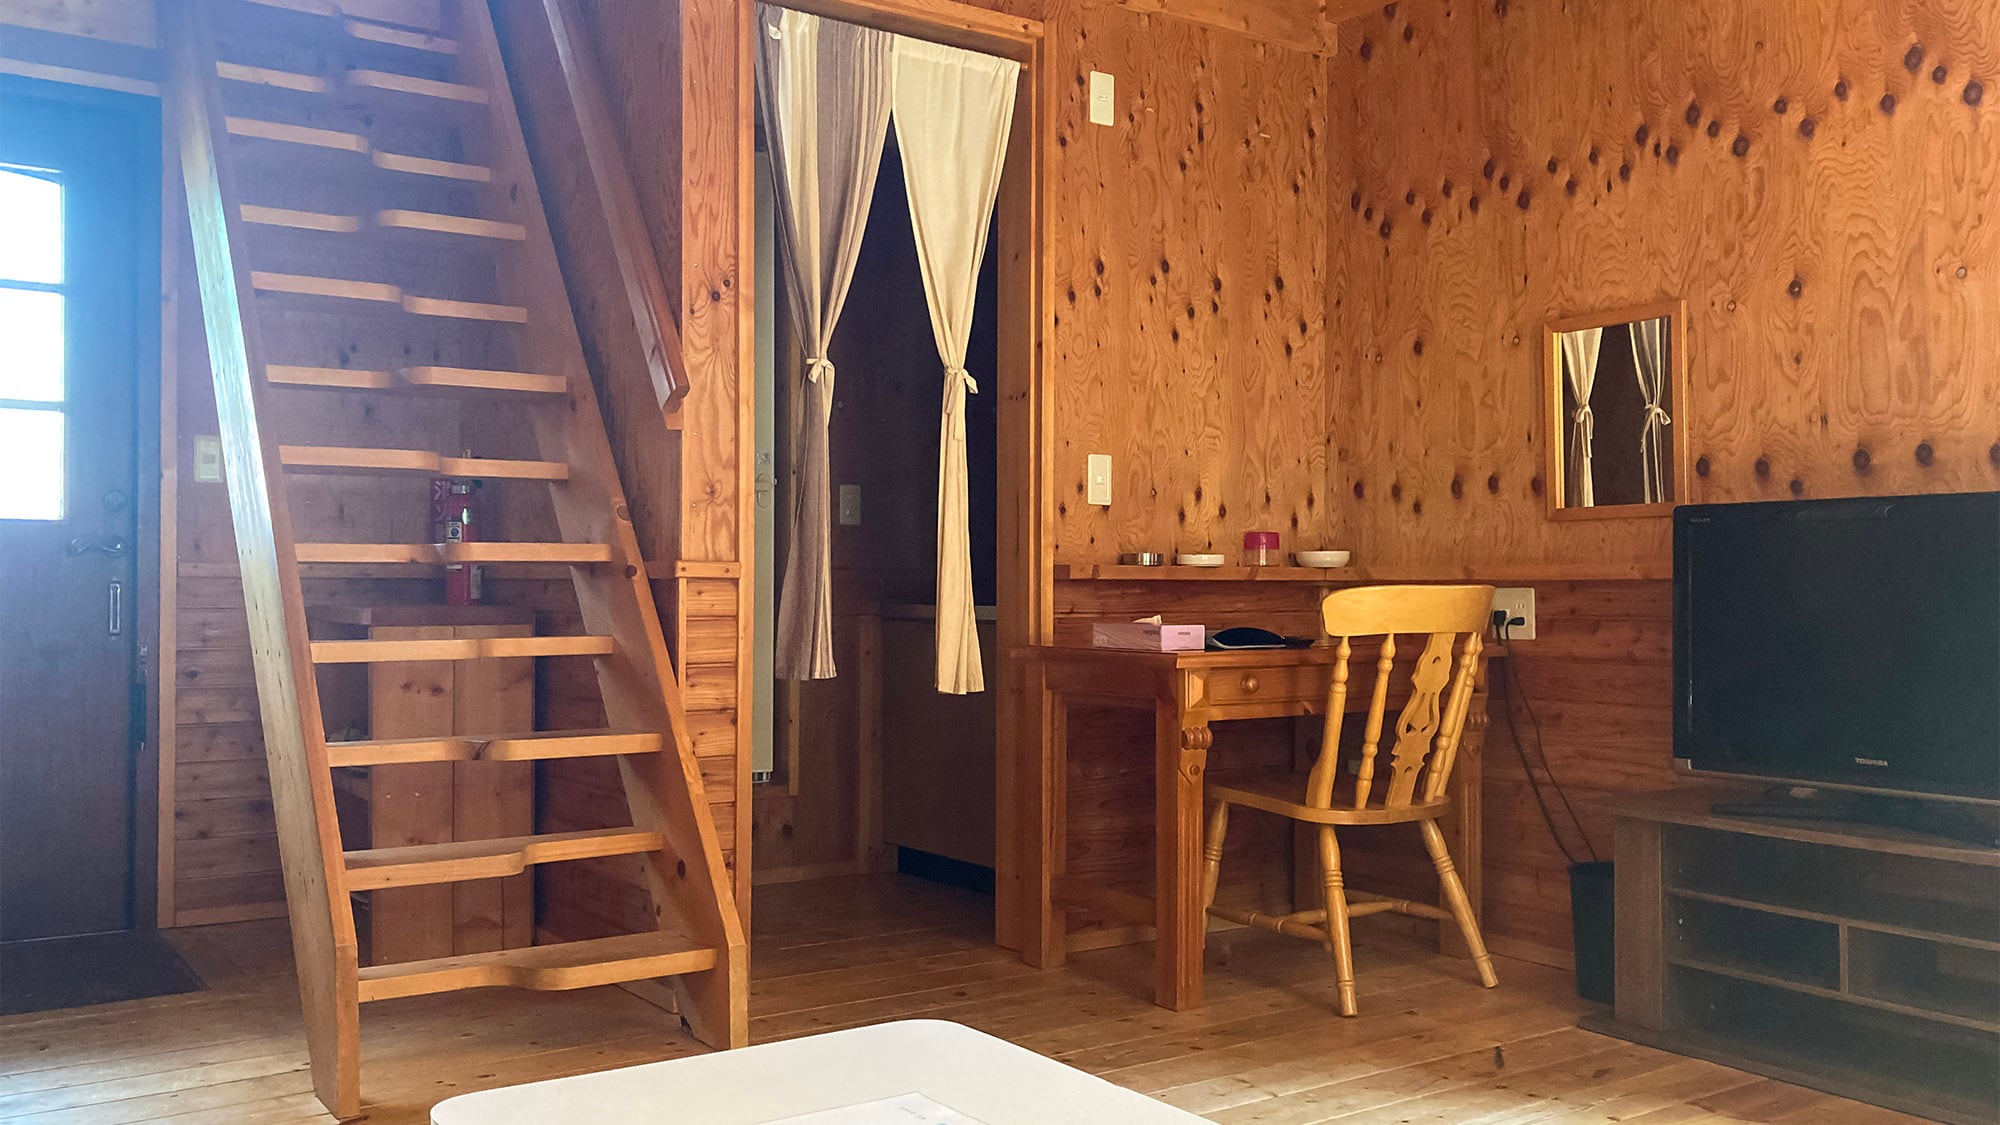 ・ [Cottage] With a loft, it is very popular with children.